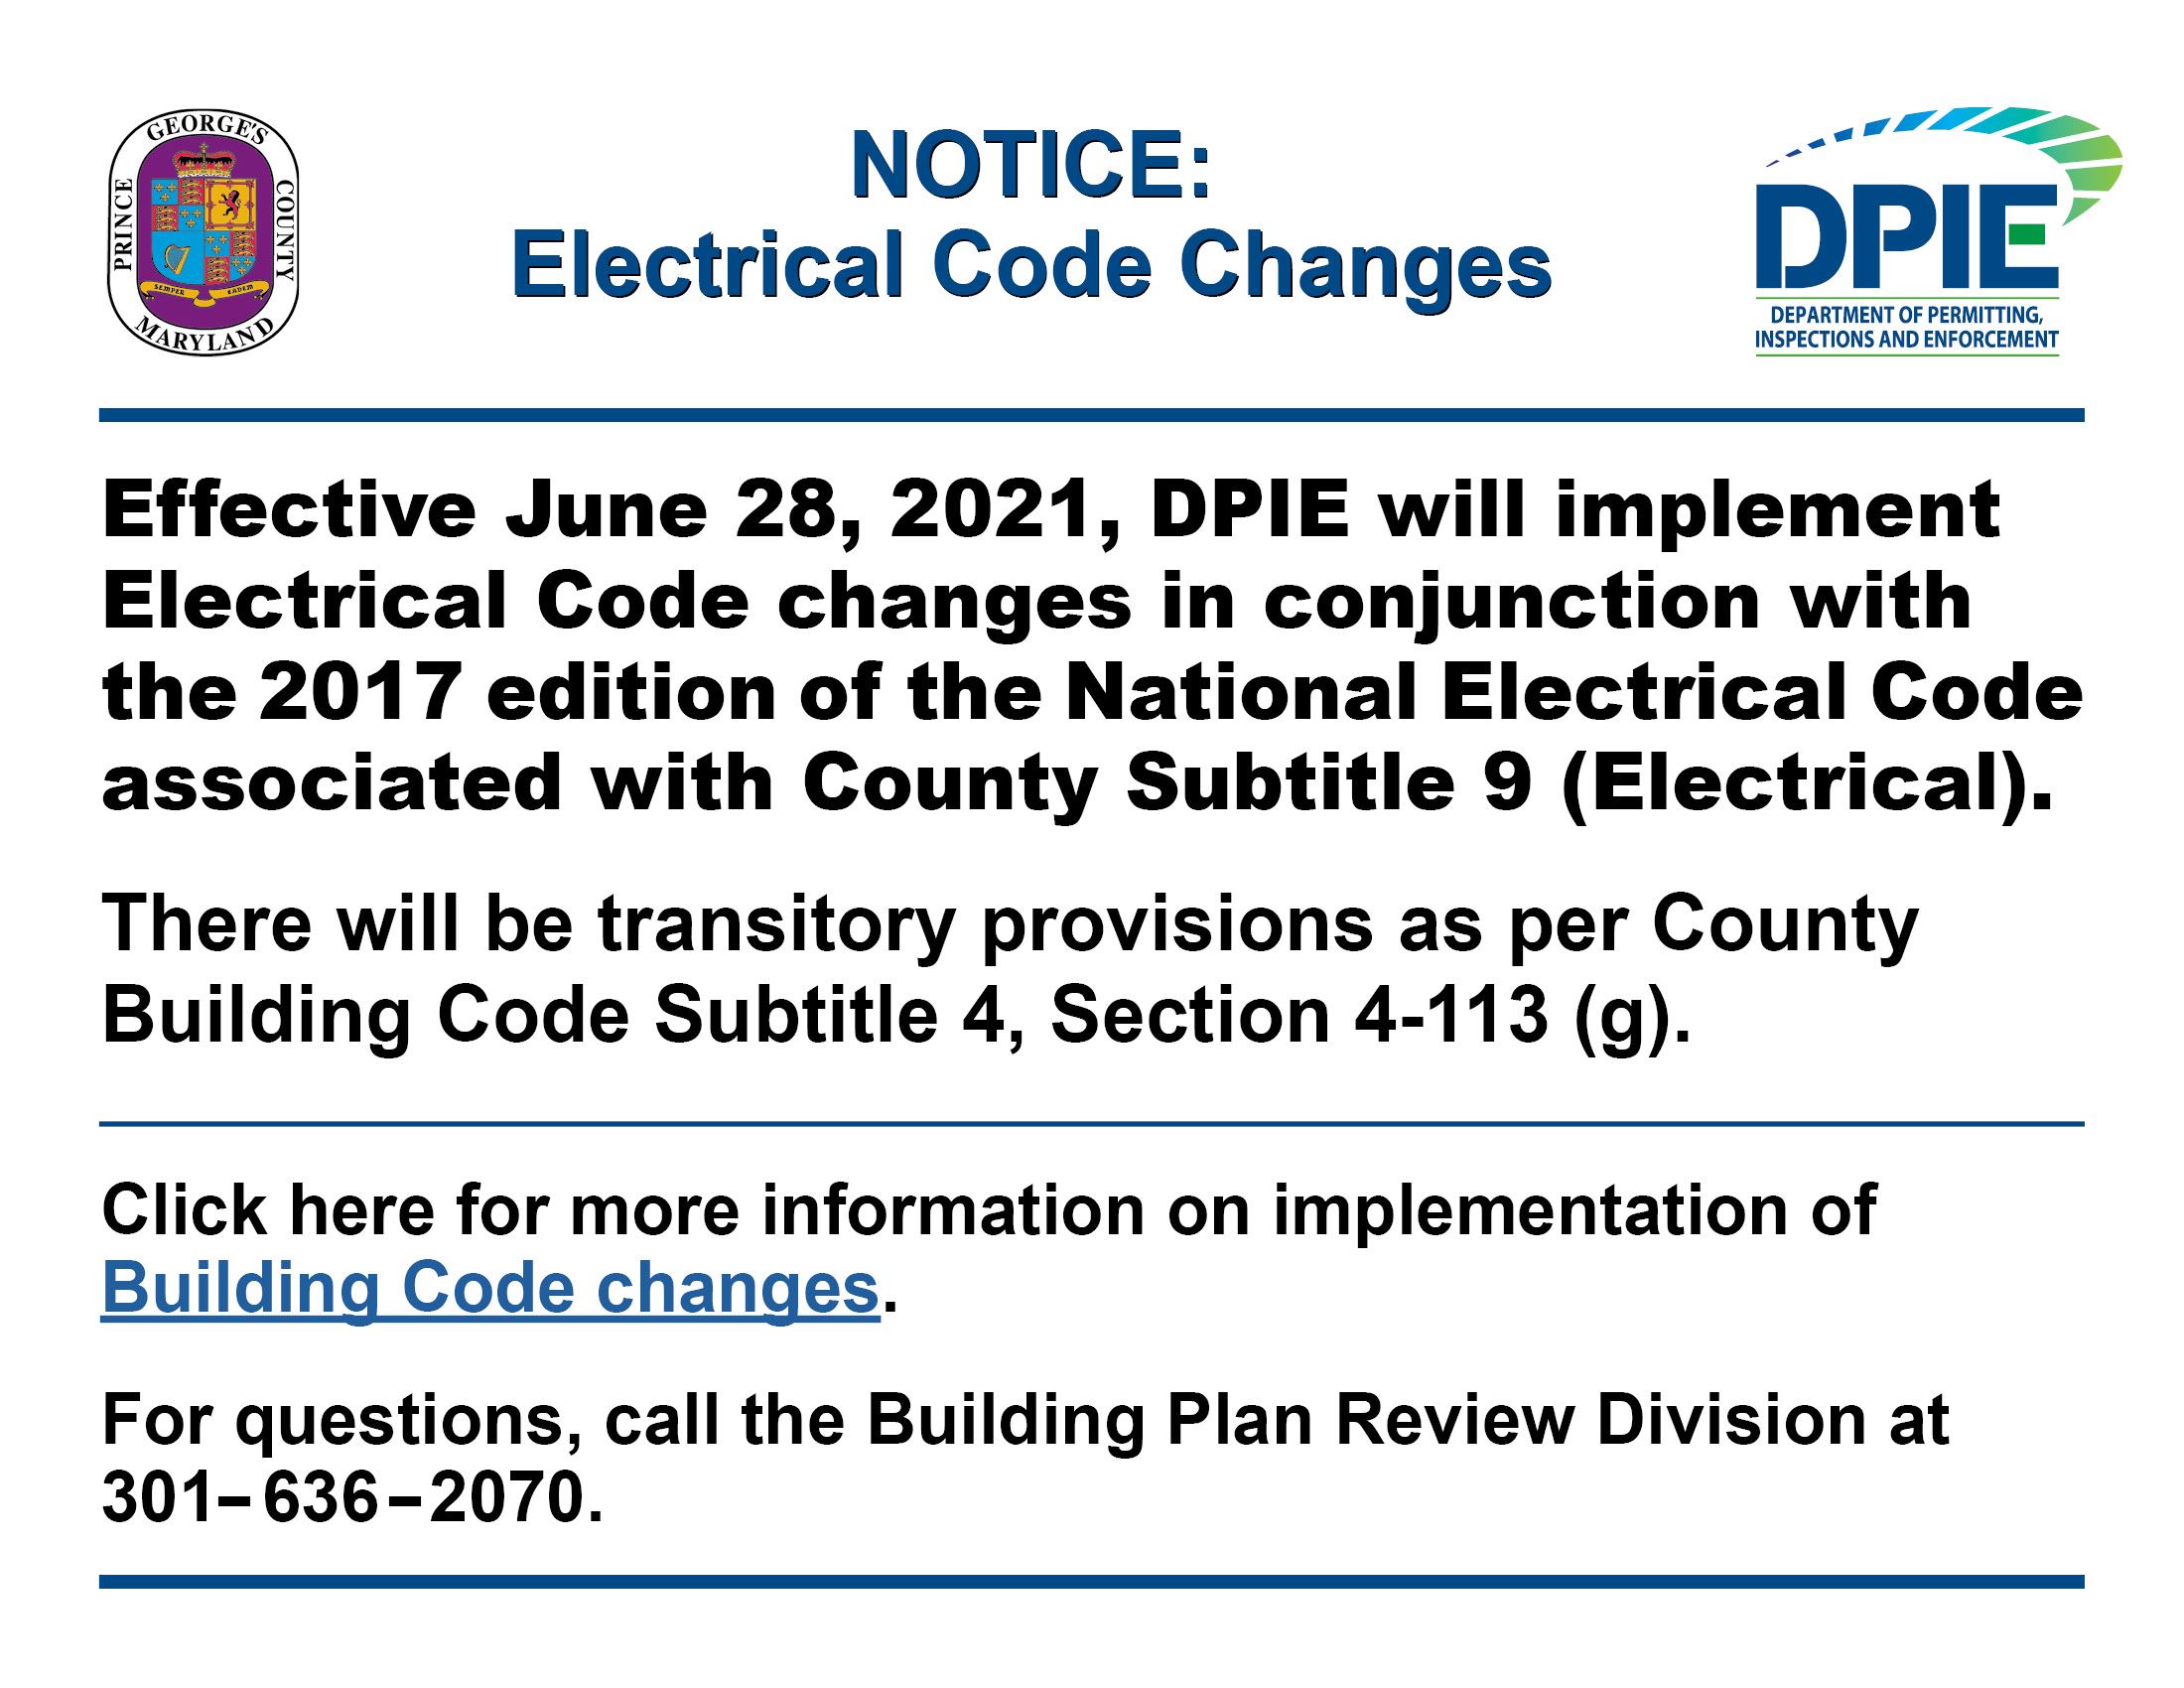 Notice - Electrical Code Changes  June 2021